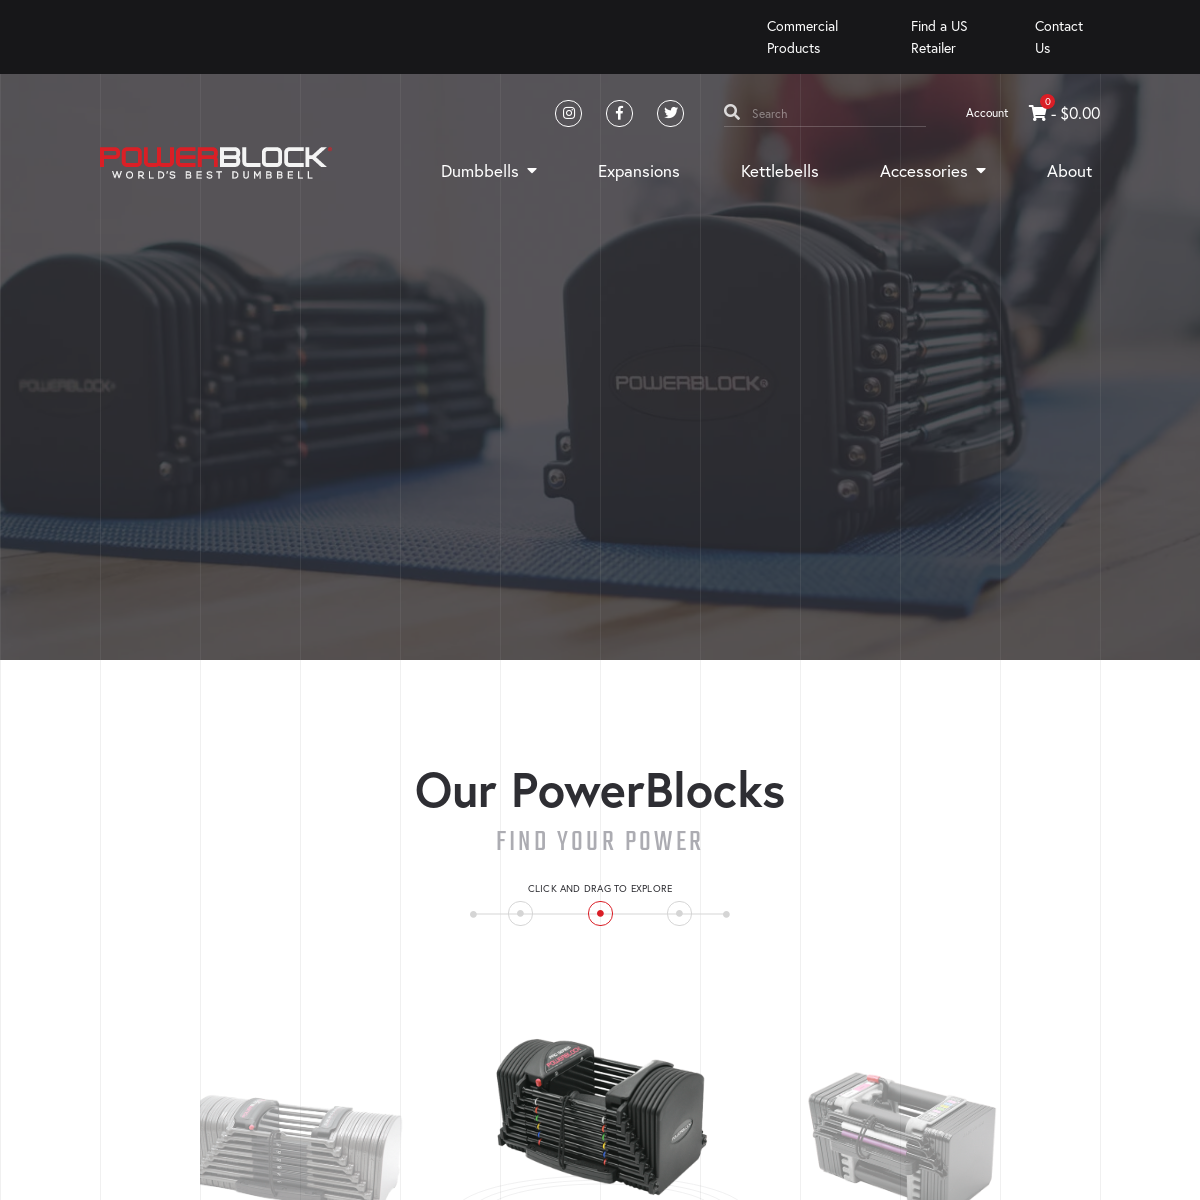 A complete backup of powerblock.com